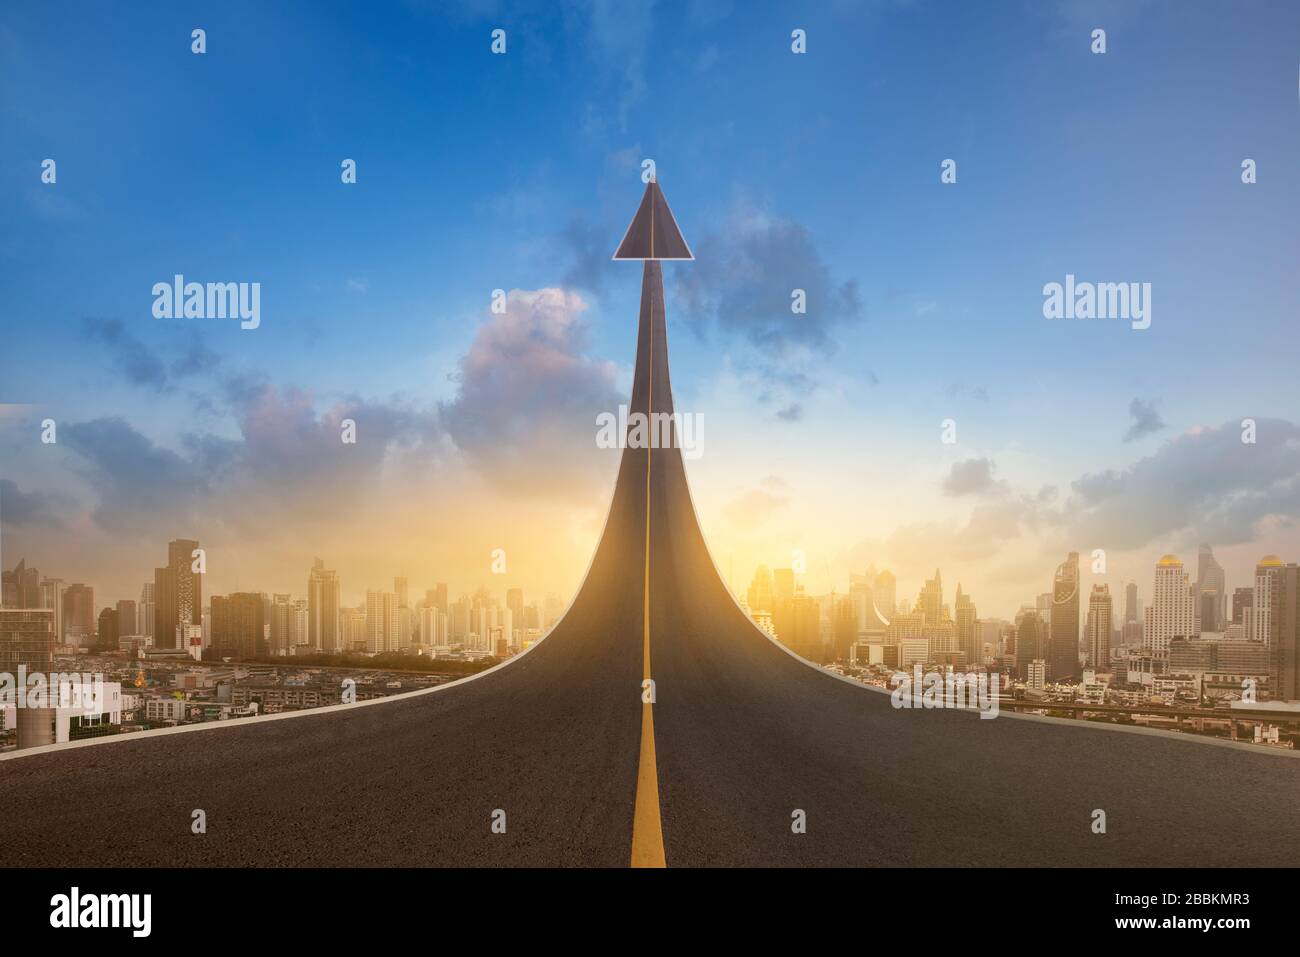 A road turning into an arrow rising upward on city background, symbolizing the direction to success in the future as a symbol of business vision. Stock Photo